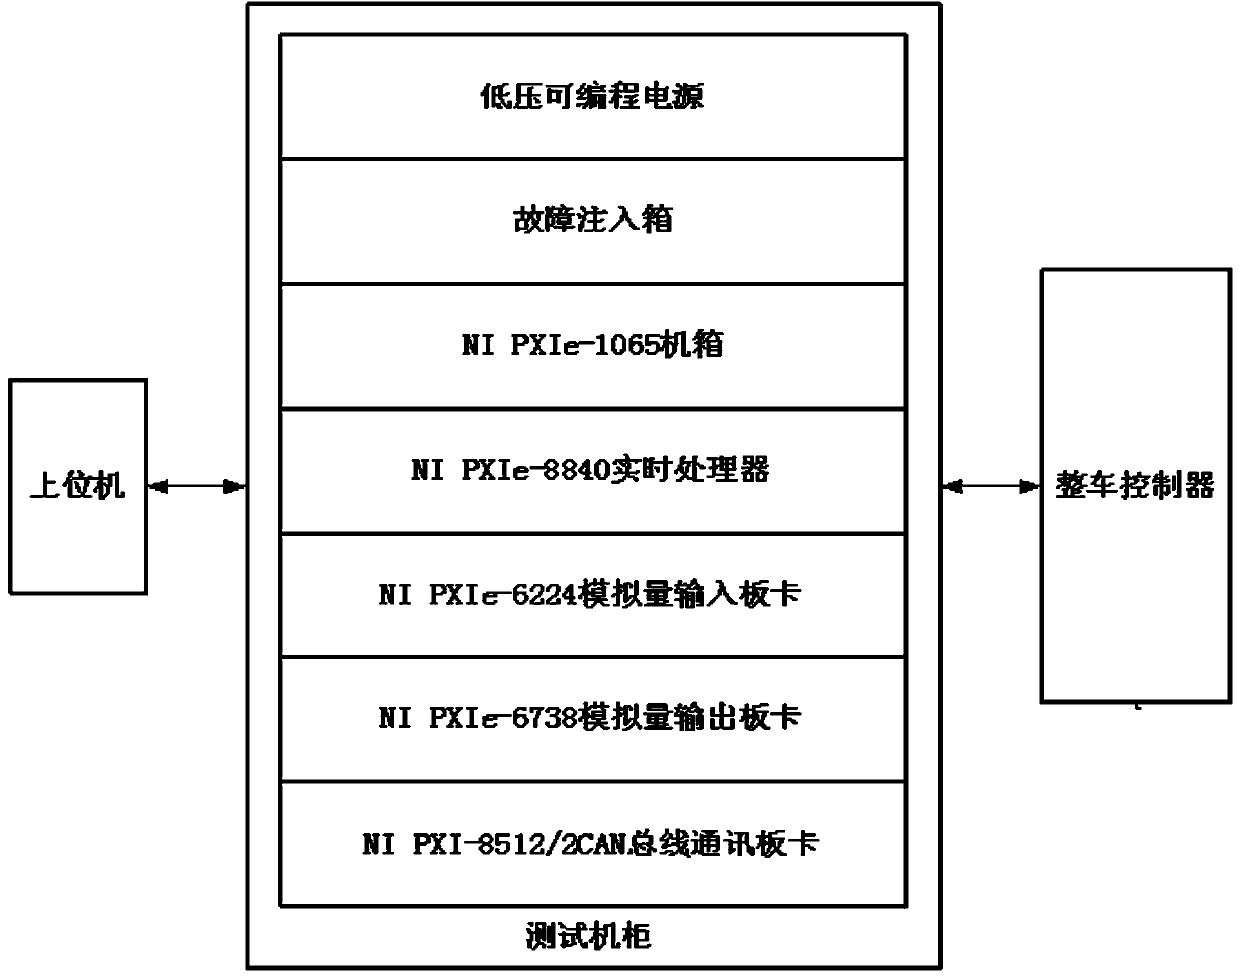 Hardware-in-the-loop test system for whole vehicle controller of four-wheel distributed drive electric bus